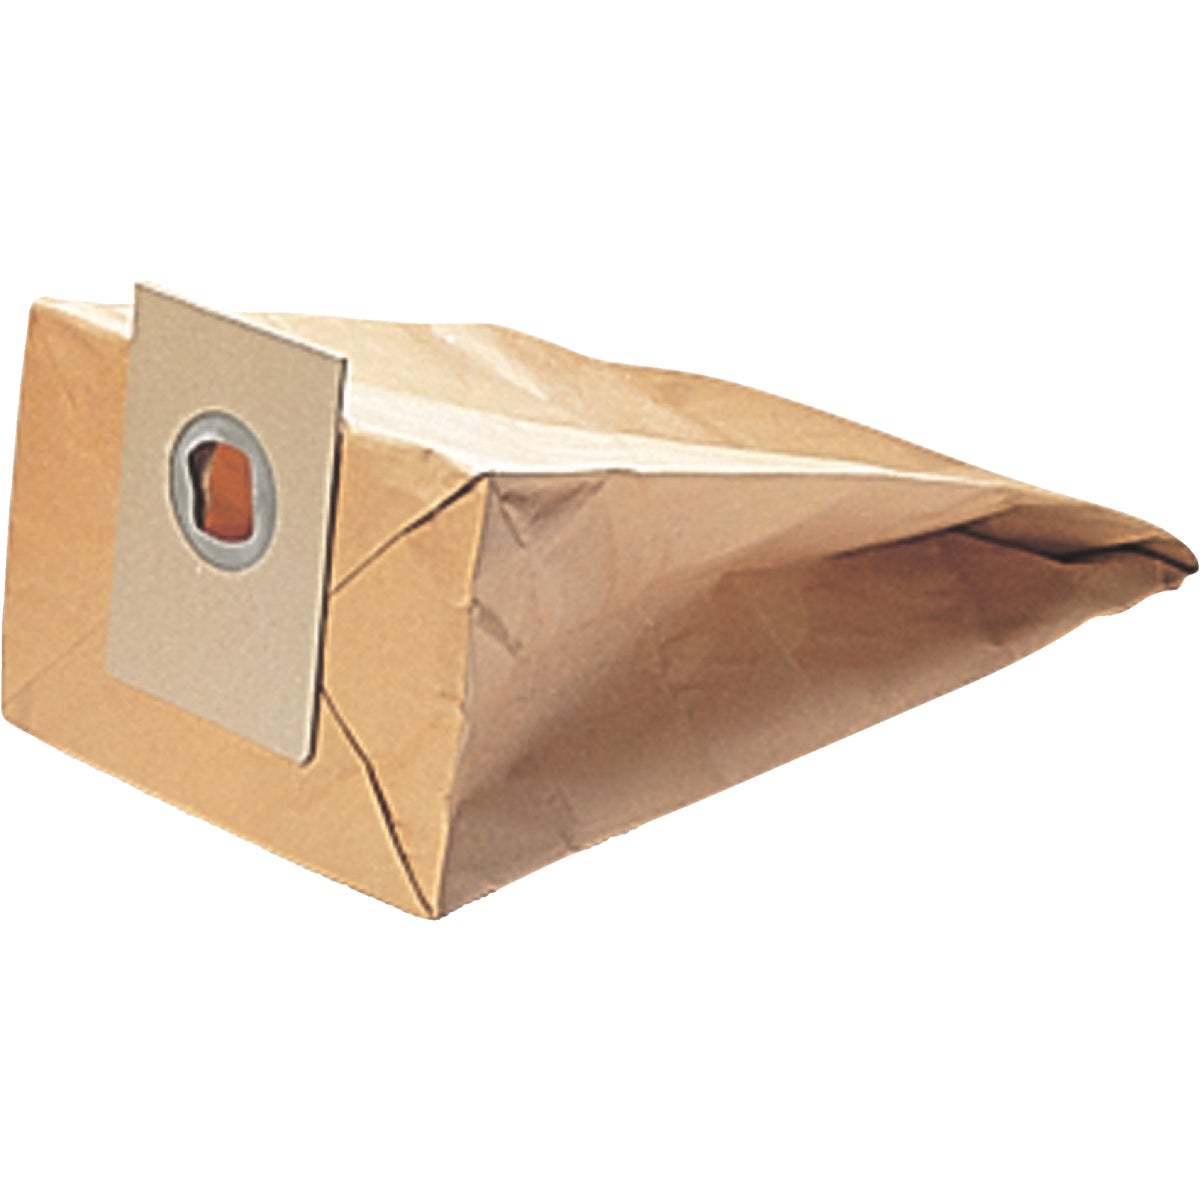 Item 379808, Compatible with Porter Cable vacuums, these strong, durable, two-ply bags 